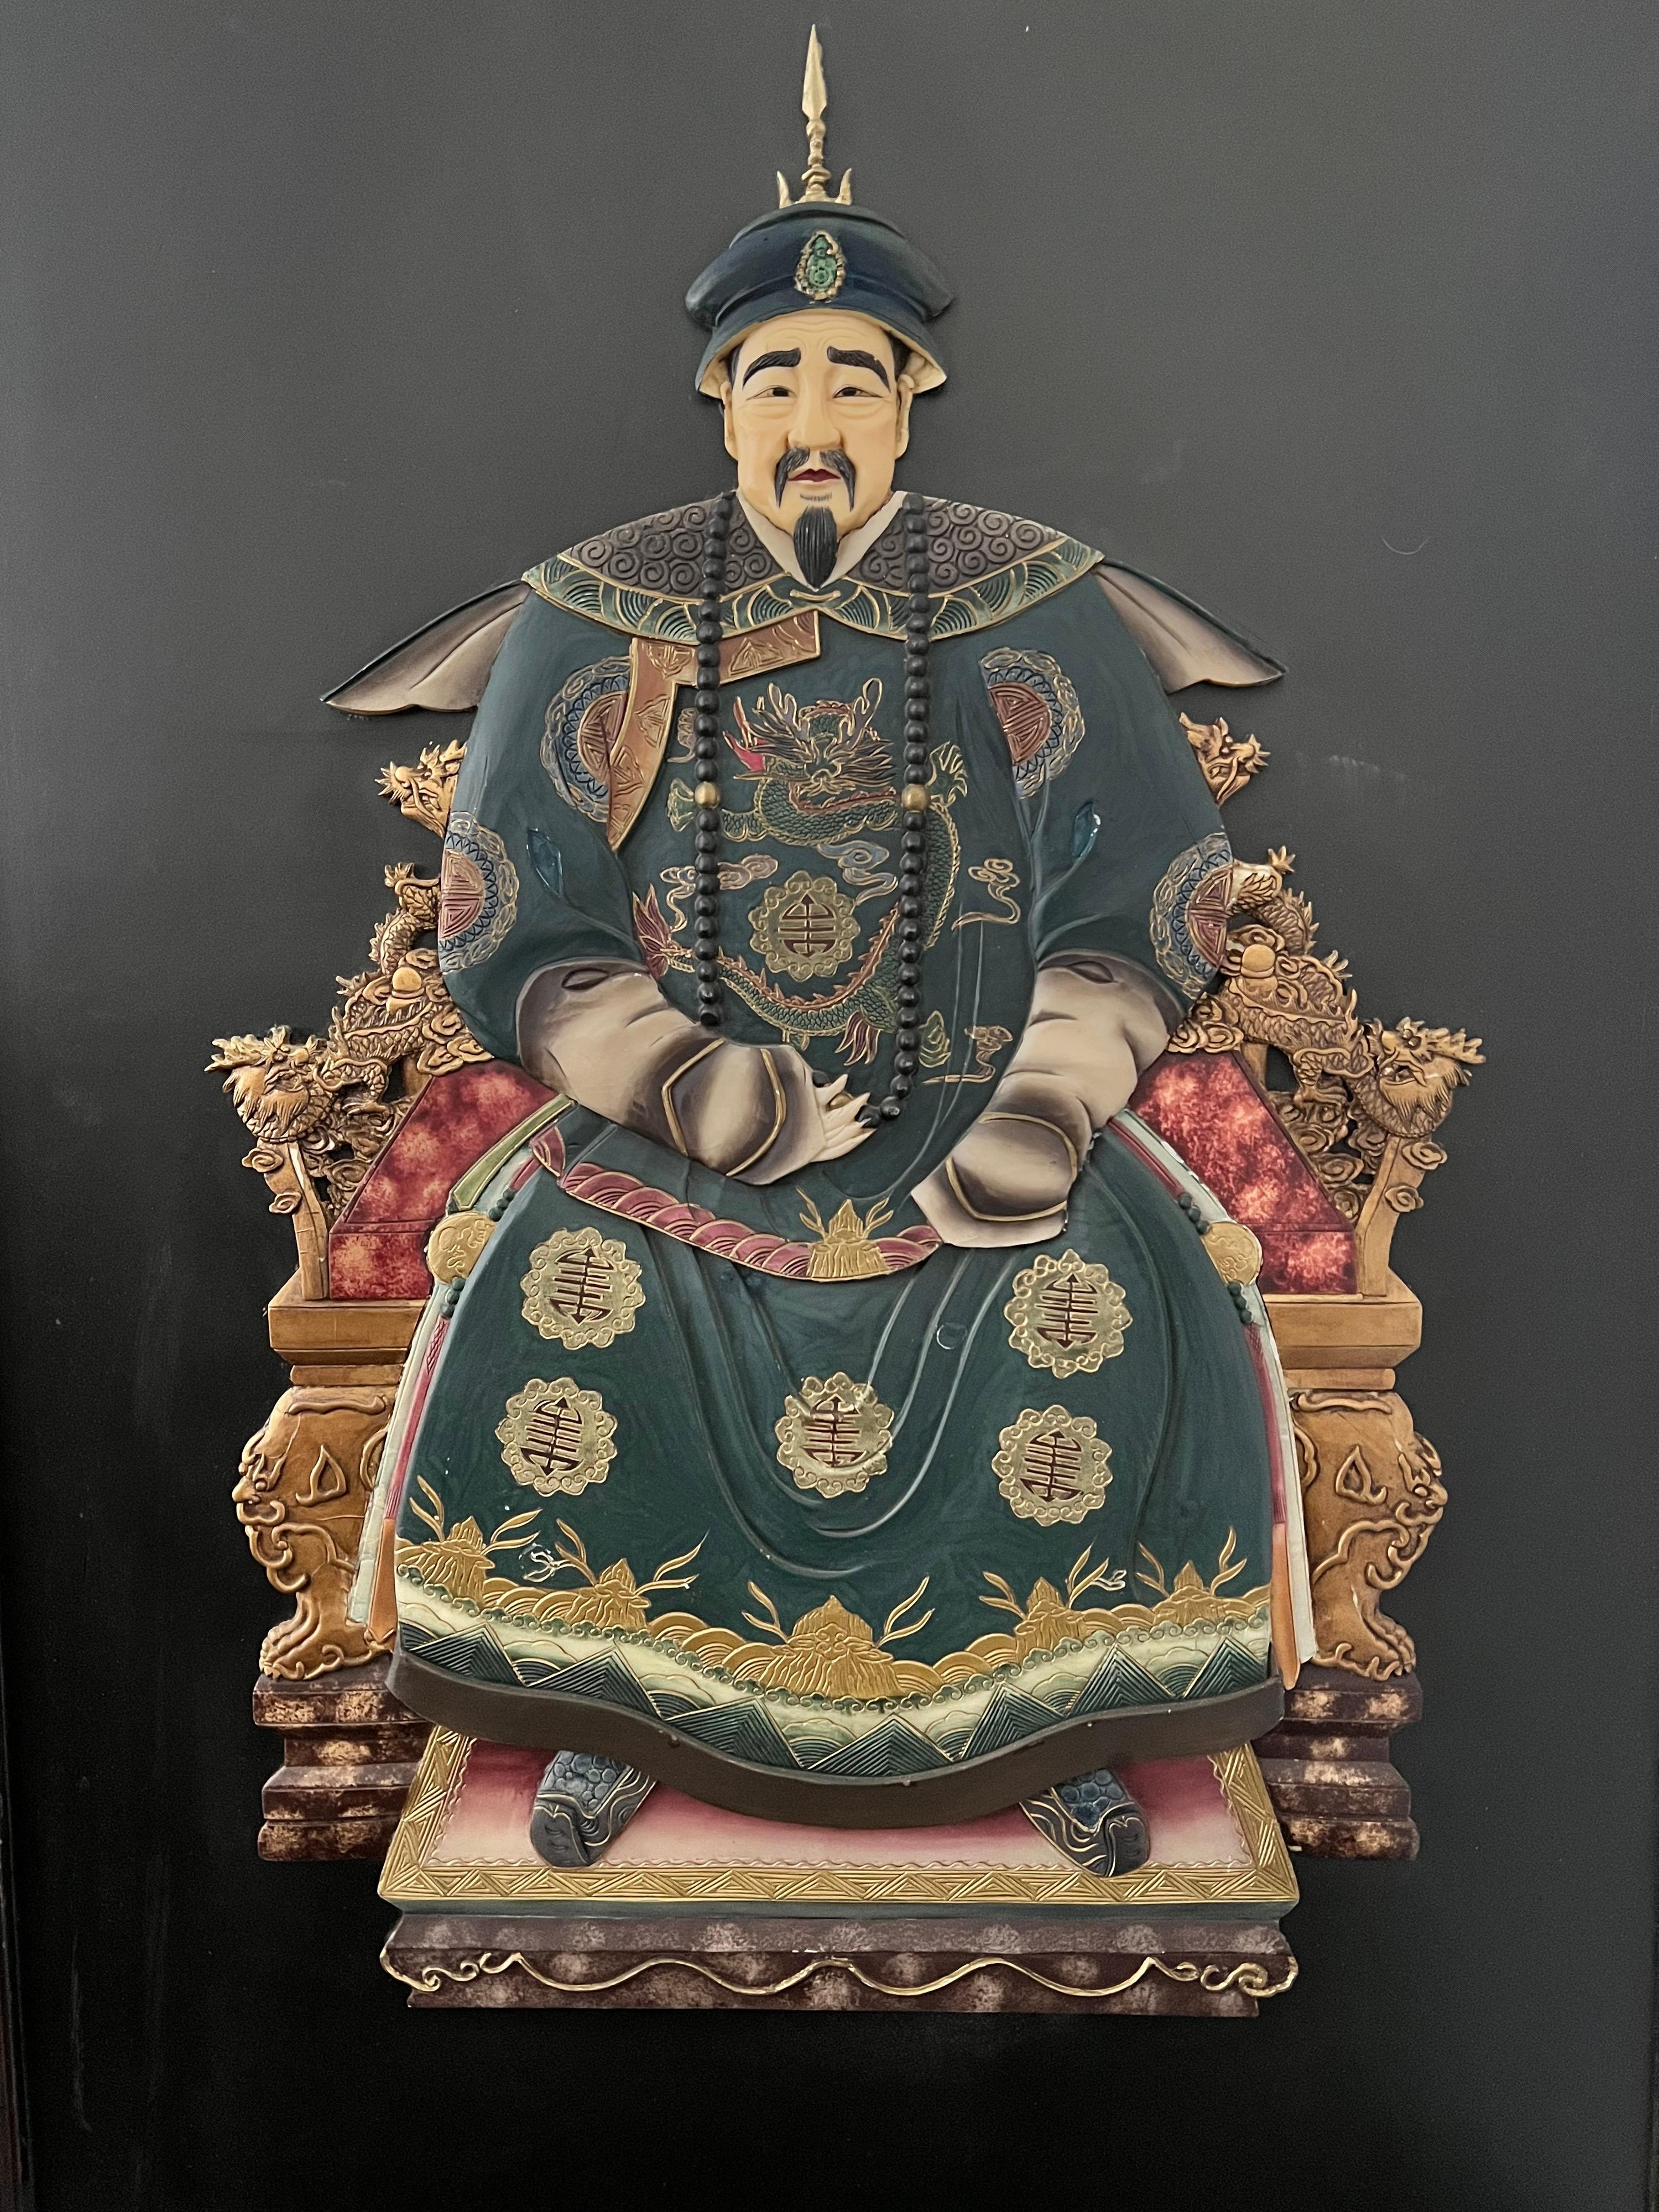 Set of two Chinese carved ancestral portraits on wood panels depicting an emperor and empress. Wonderful detail on both garments. Displayed in a rosewood frame. Has brass hardware and ready to hang.
Price is for each individual piece.